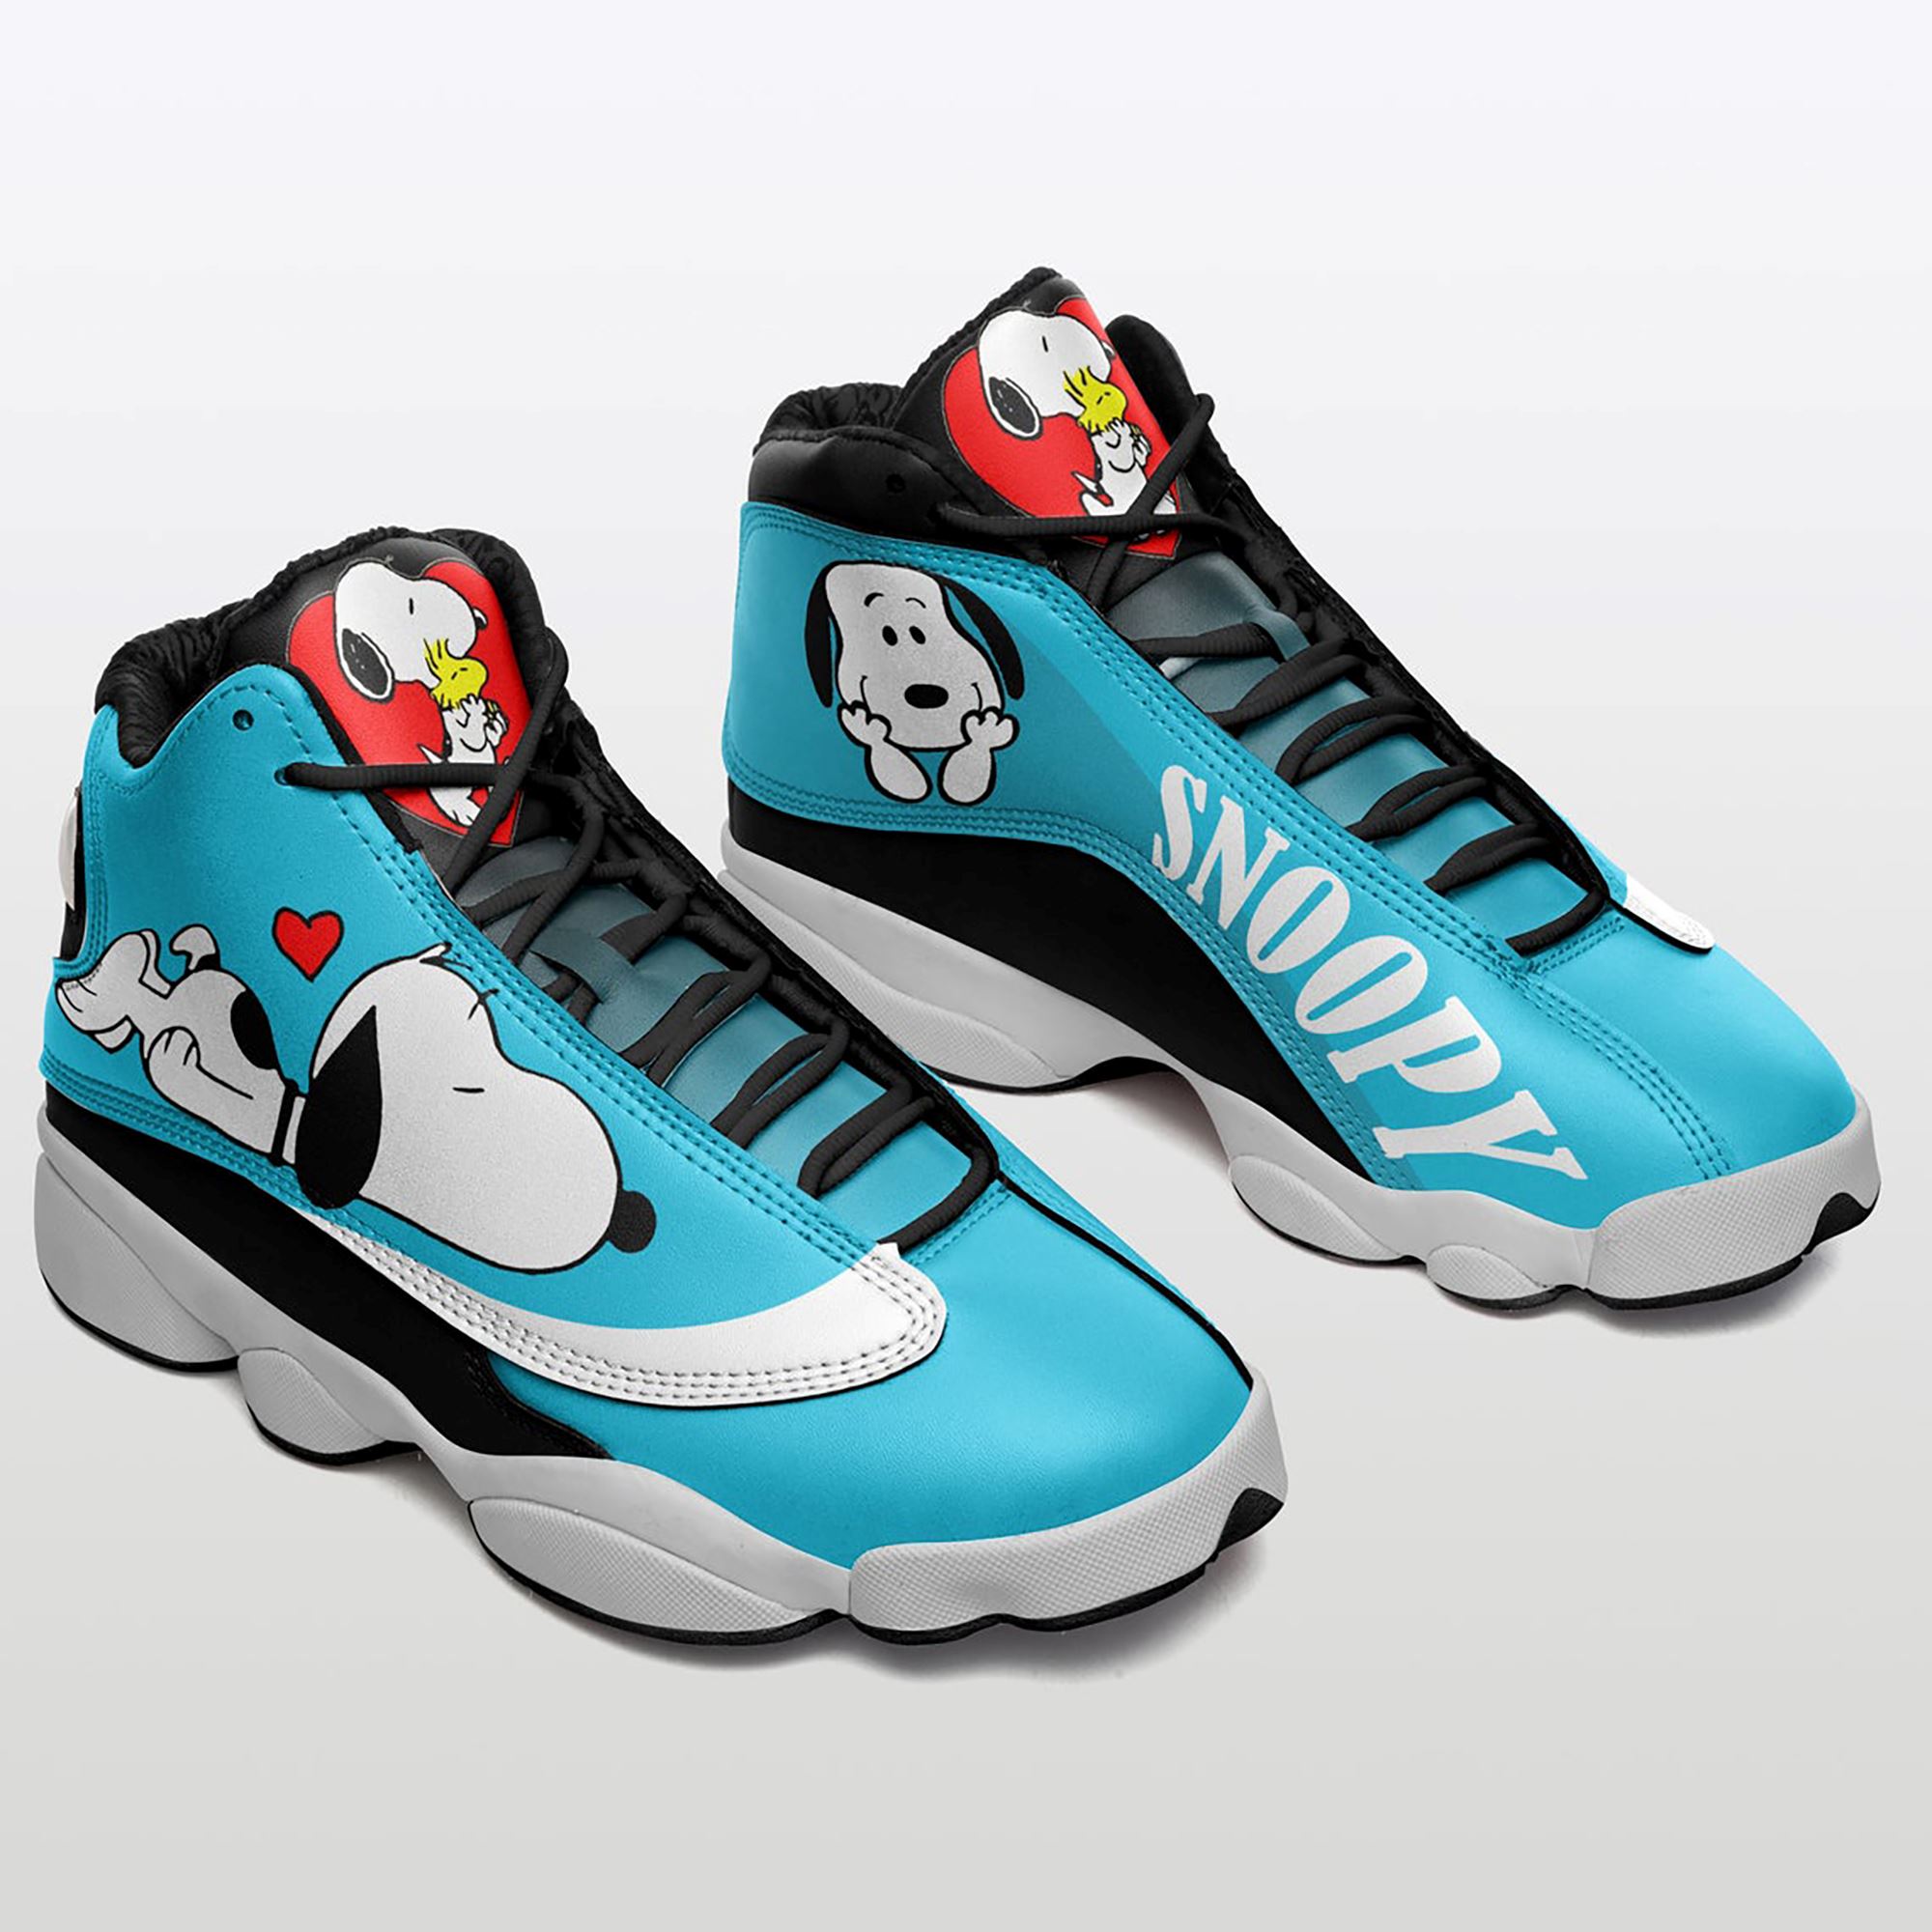 Snoopy Jordan 13 Shoes Snoopy Shoes Gift For Snoopy Dog Lovers